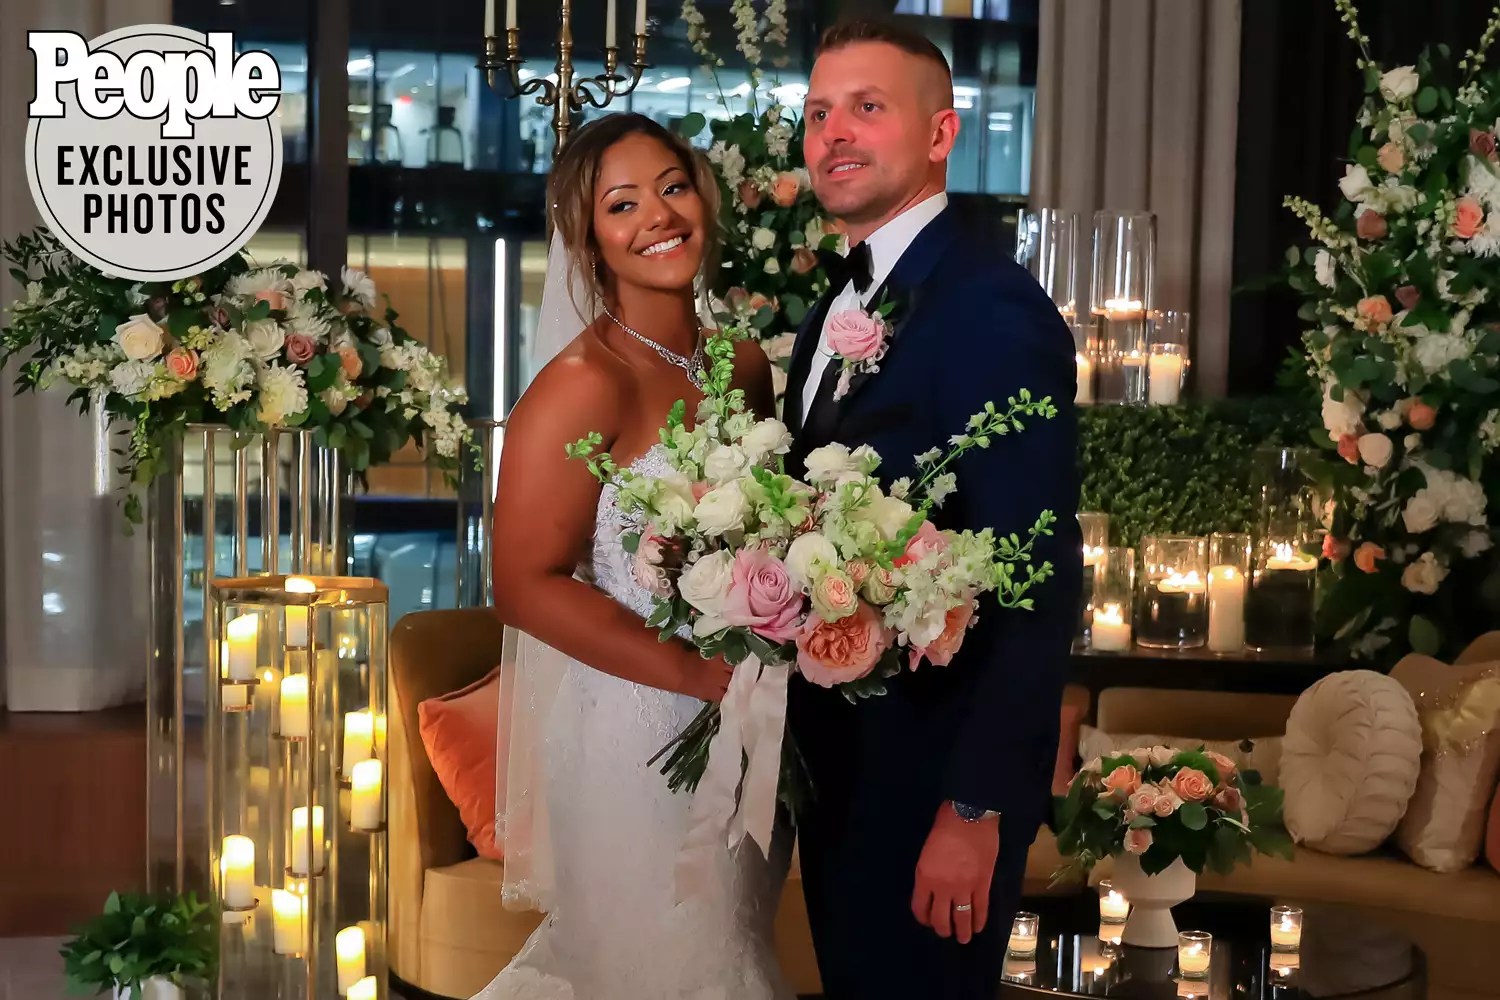 ‘Married at First Sight’ Season 16 offers a captivating sneak peek